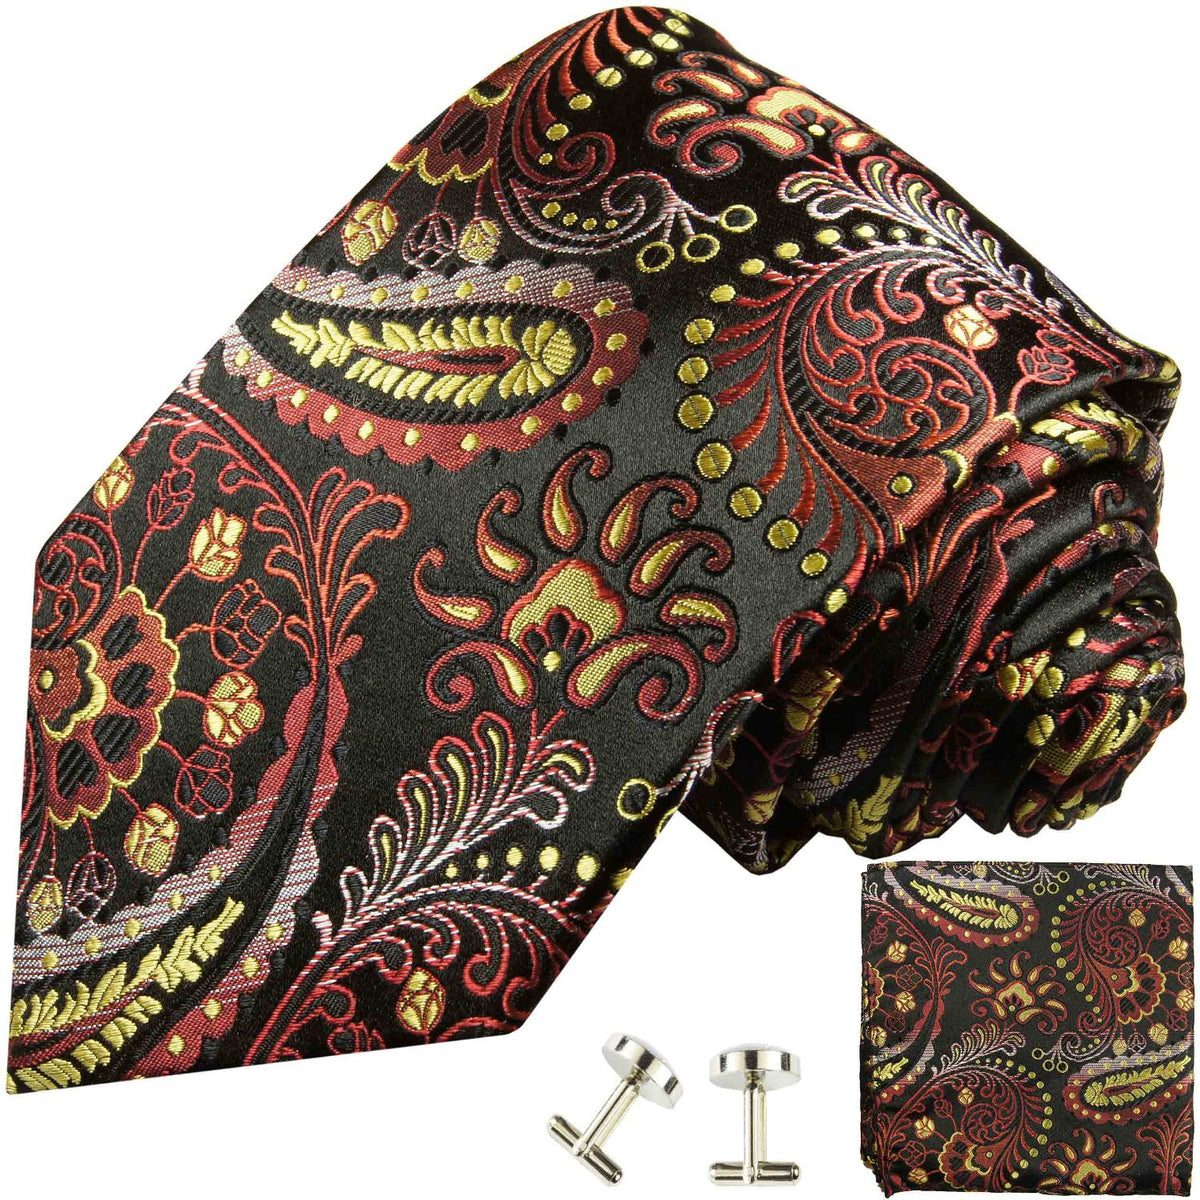 Red, Yellow and Black Paisley Formal Silk Tie and Accessories | Paul Malone